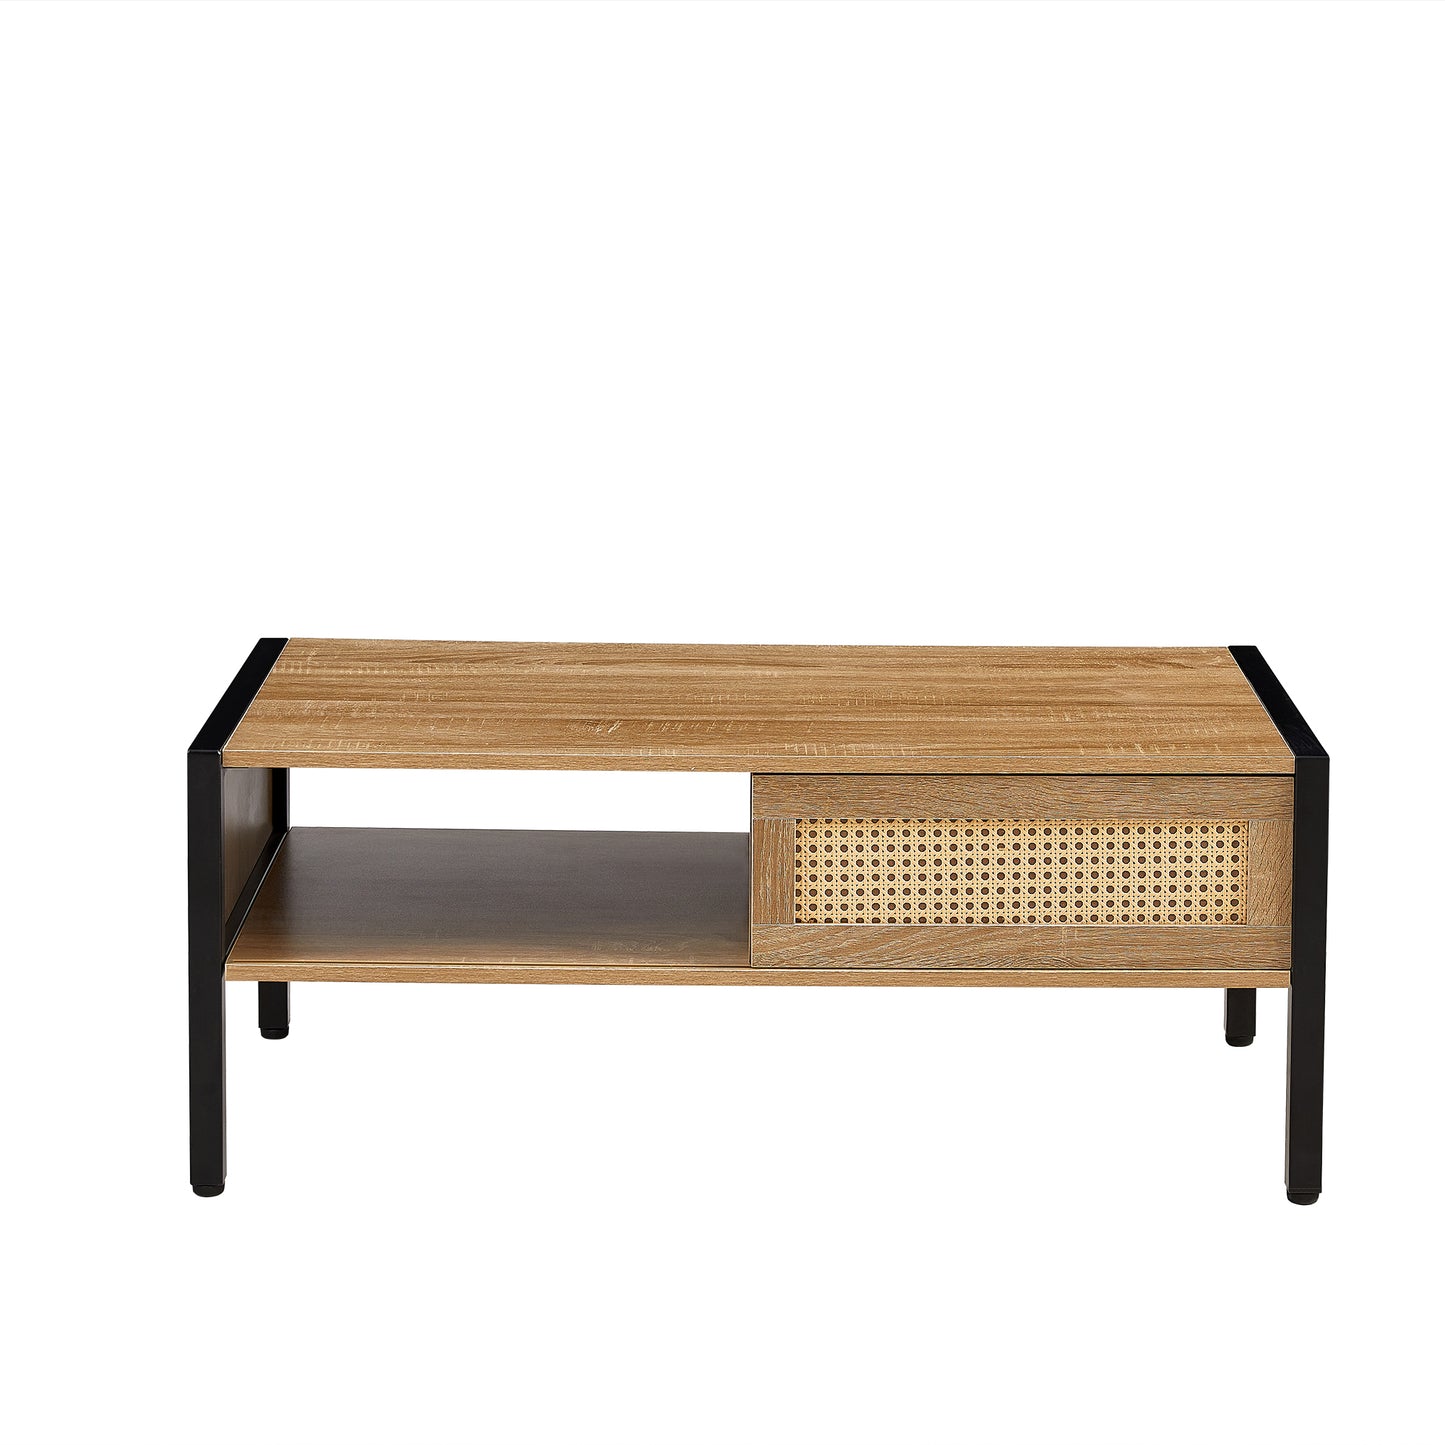 40.16" Rattan Coffee table, sliding door for storage, metal legs, Modern table  for living room , natural